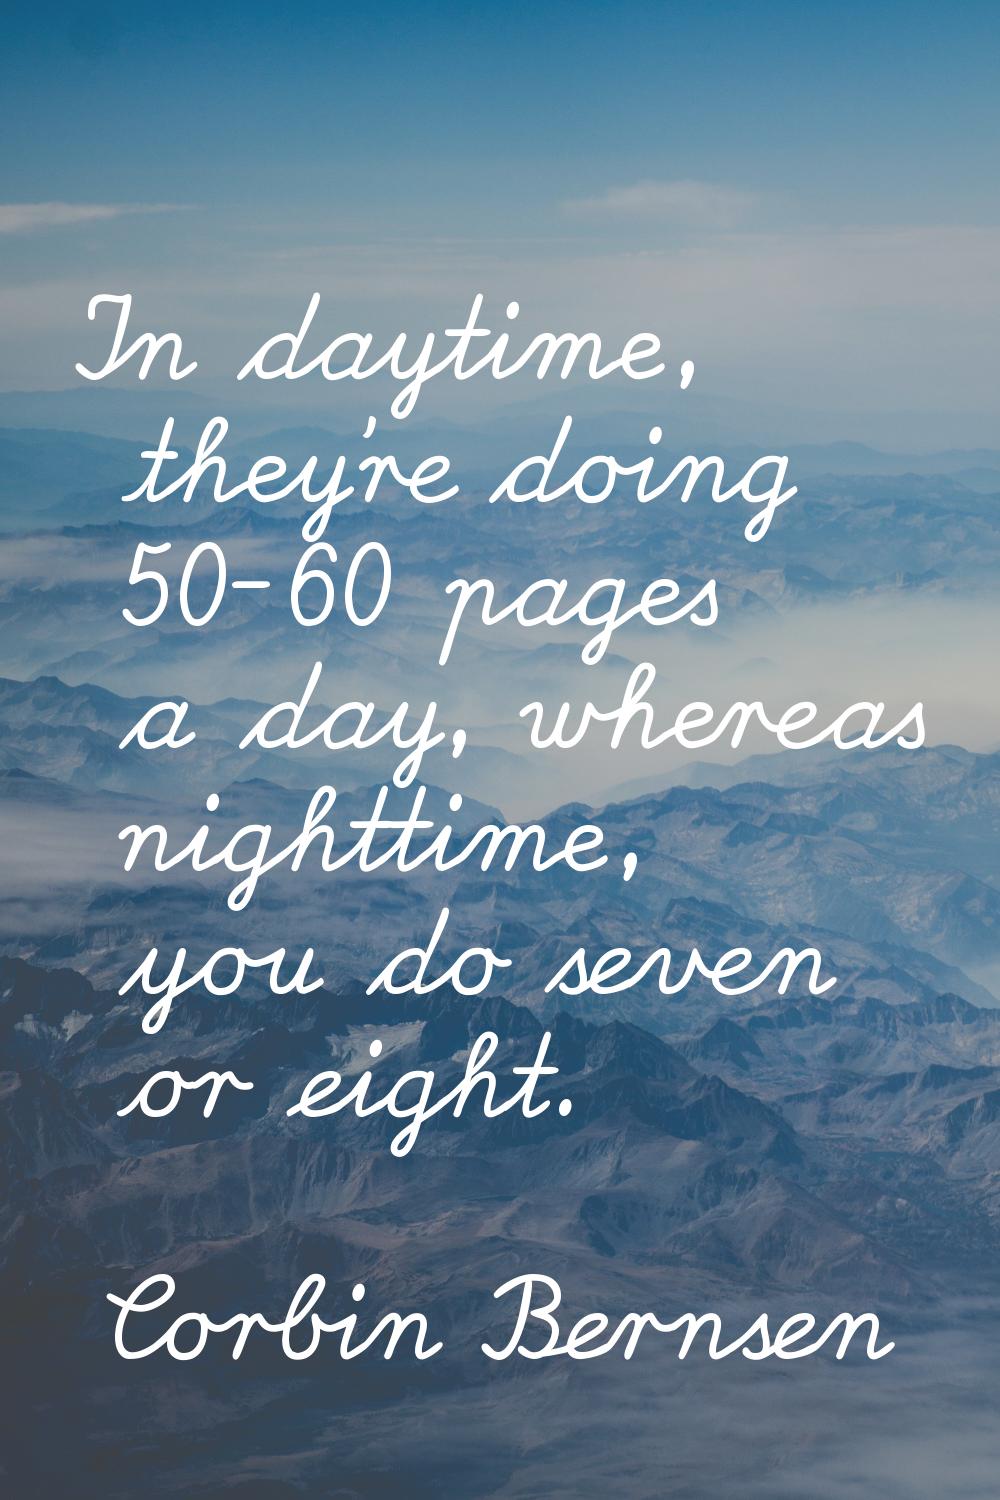 In daytime, they're doing 50-60 pages a day, whereas nighttime, you do seven or eight.